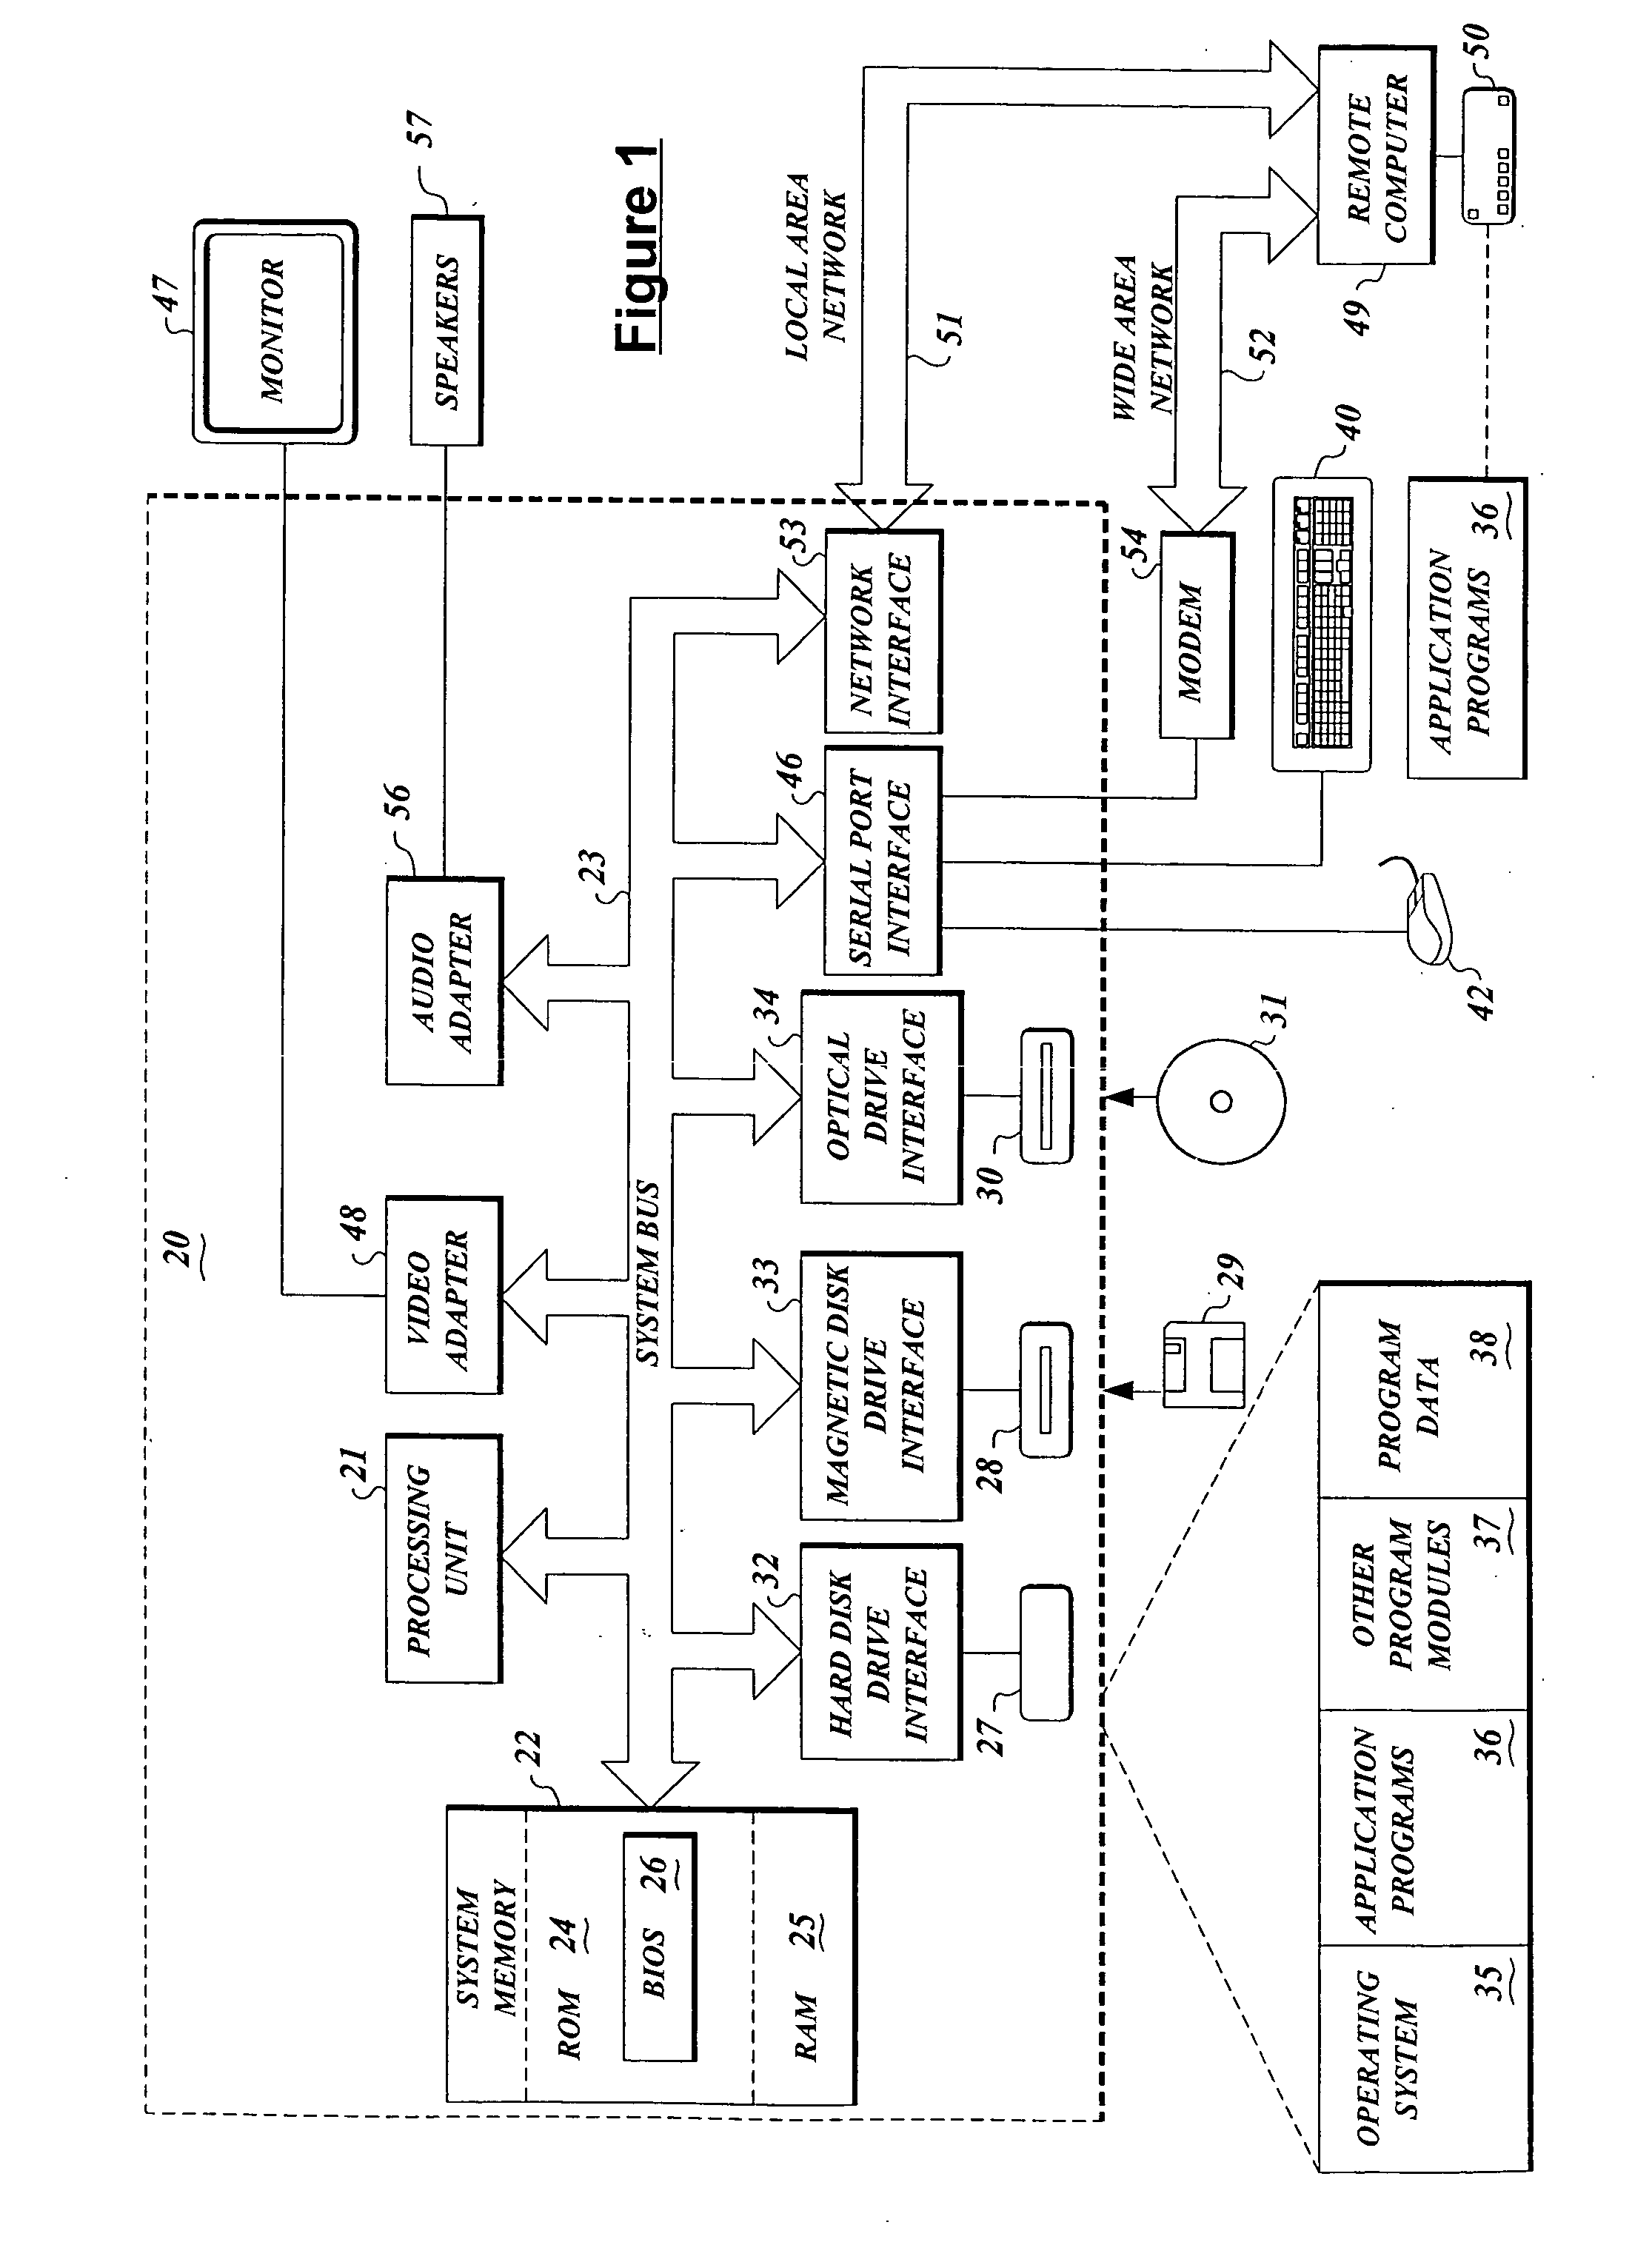 Method and apparatus for displaying multiple contexts in electronic documents